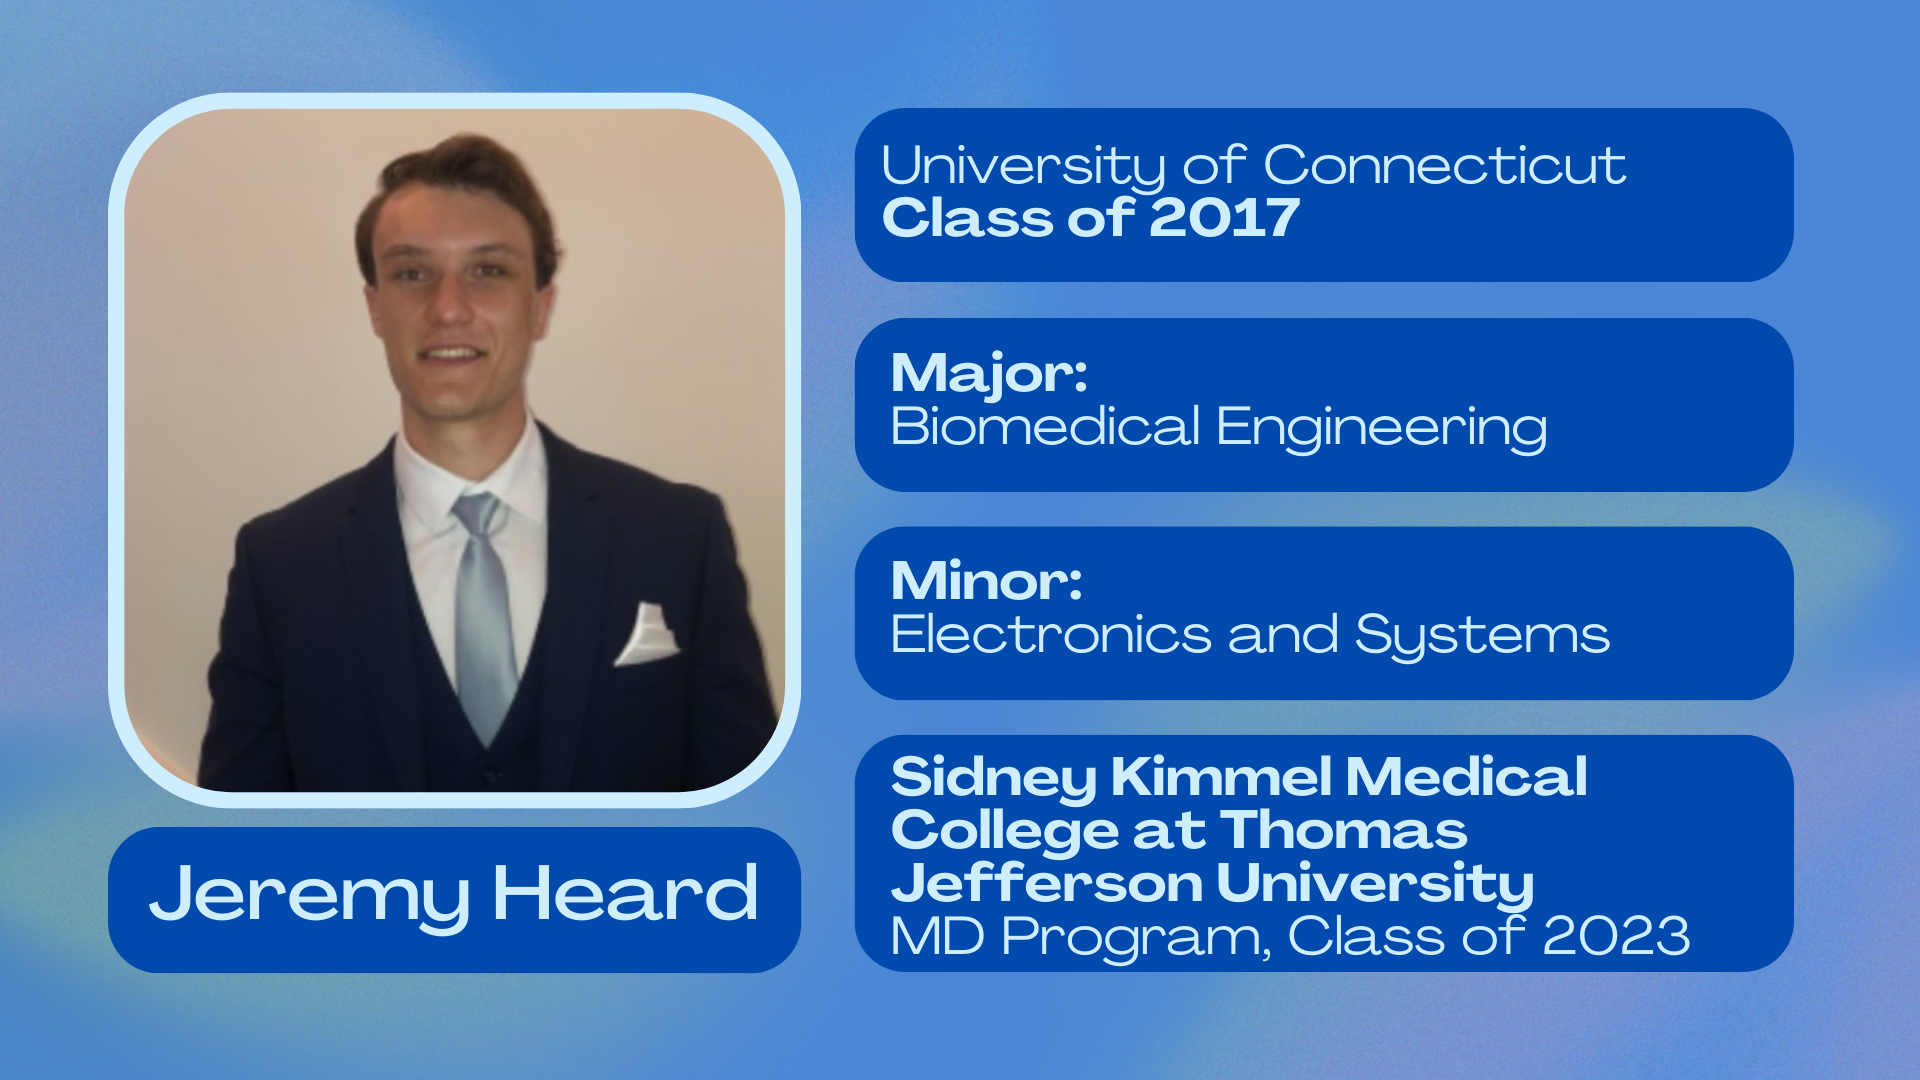 Jeremy Heard; University of Connecticut class of 2017; Major: Biomedical Engineering; Minor: Electronics and Systems; Sidney Kimmel Medical College at Thomas Jefferson University MD program class of 2023